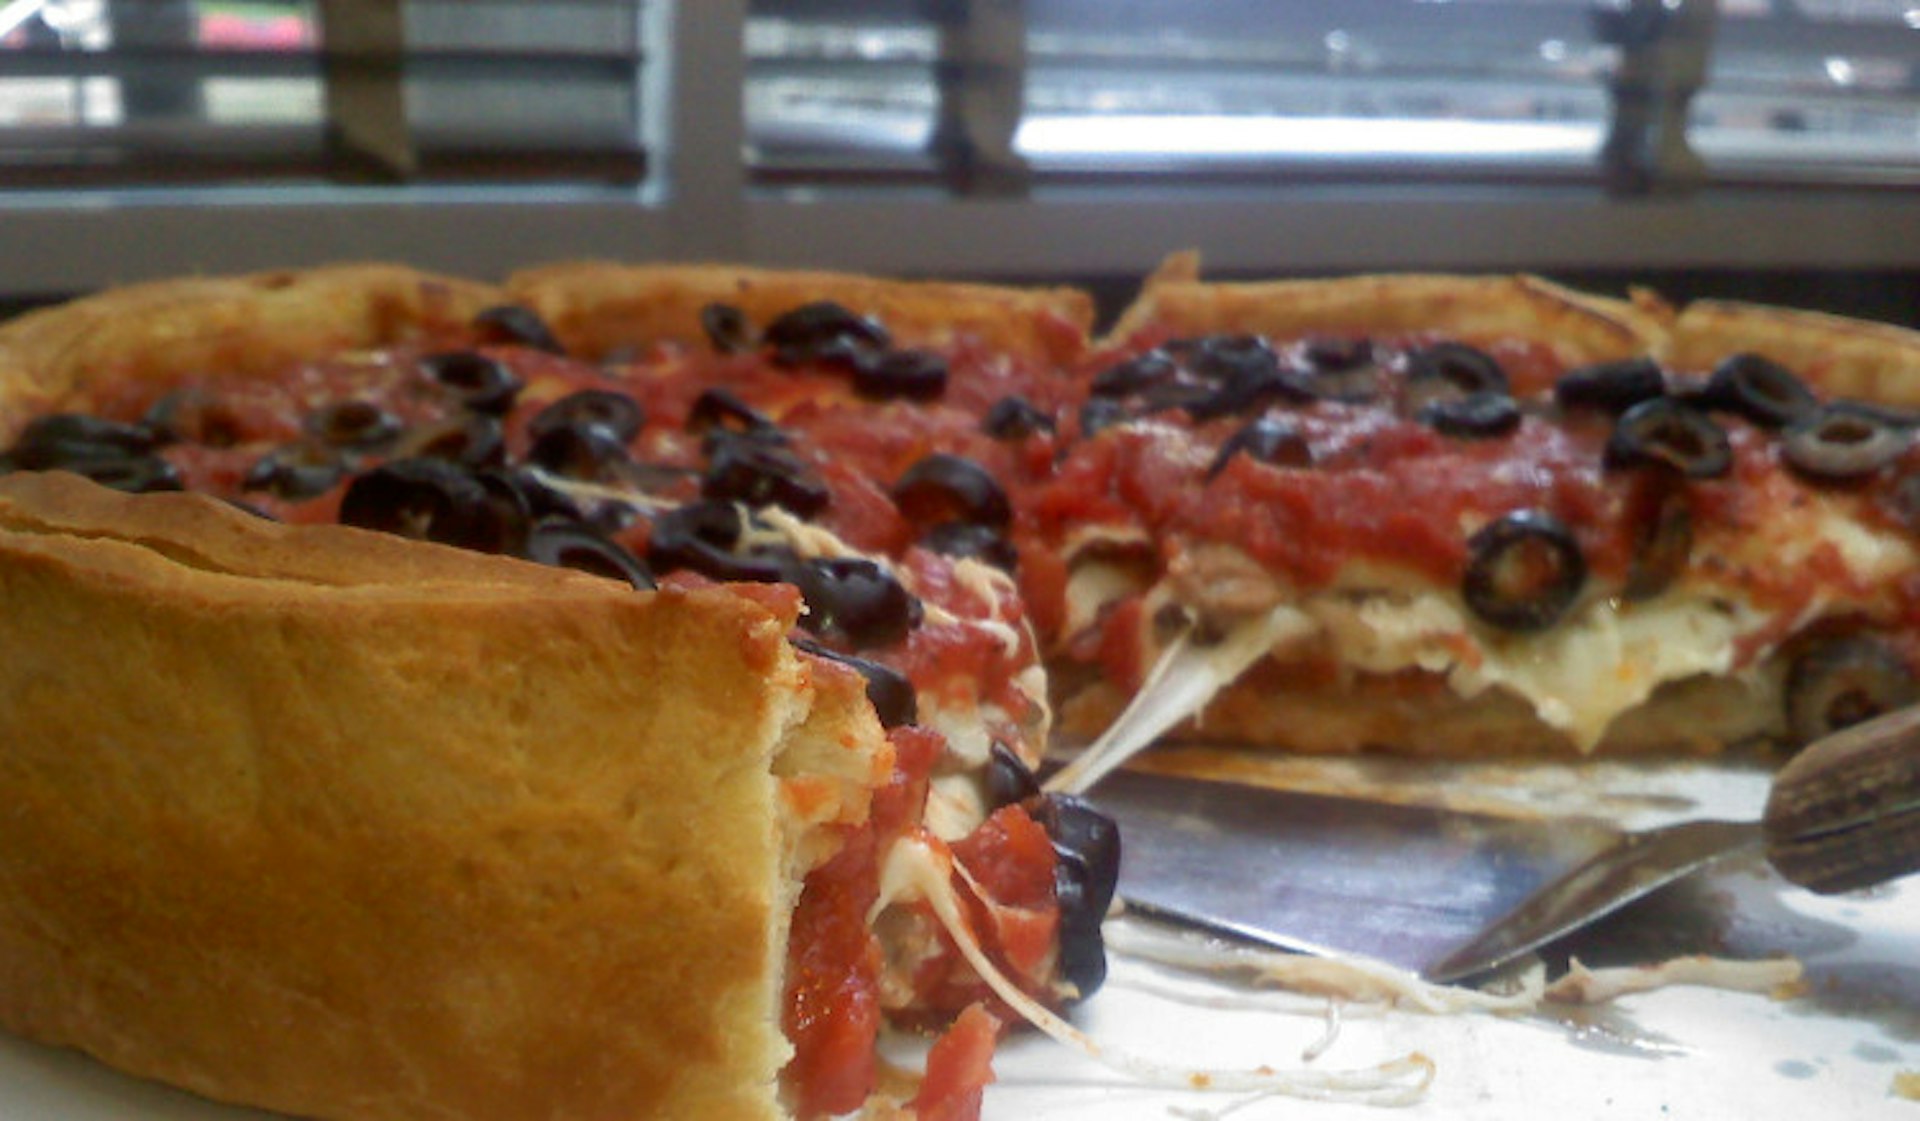 A not-so-little slice of heaven: Chicago deep dish pizza. Image by musicisentropy / CC BY-SA 2.0